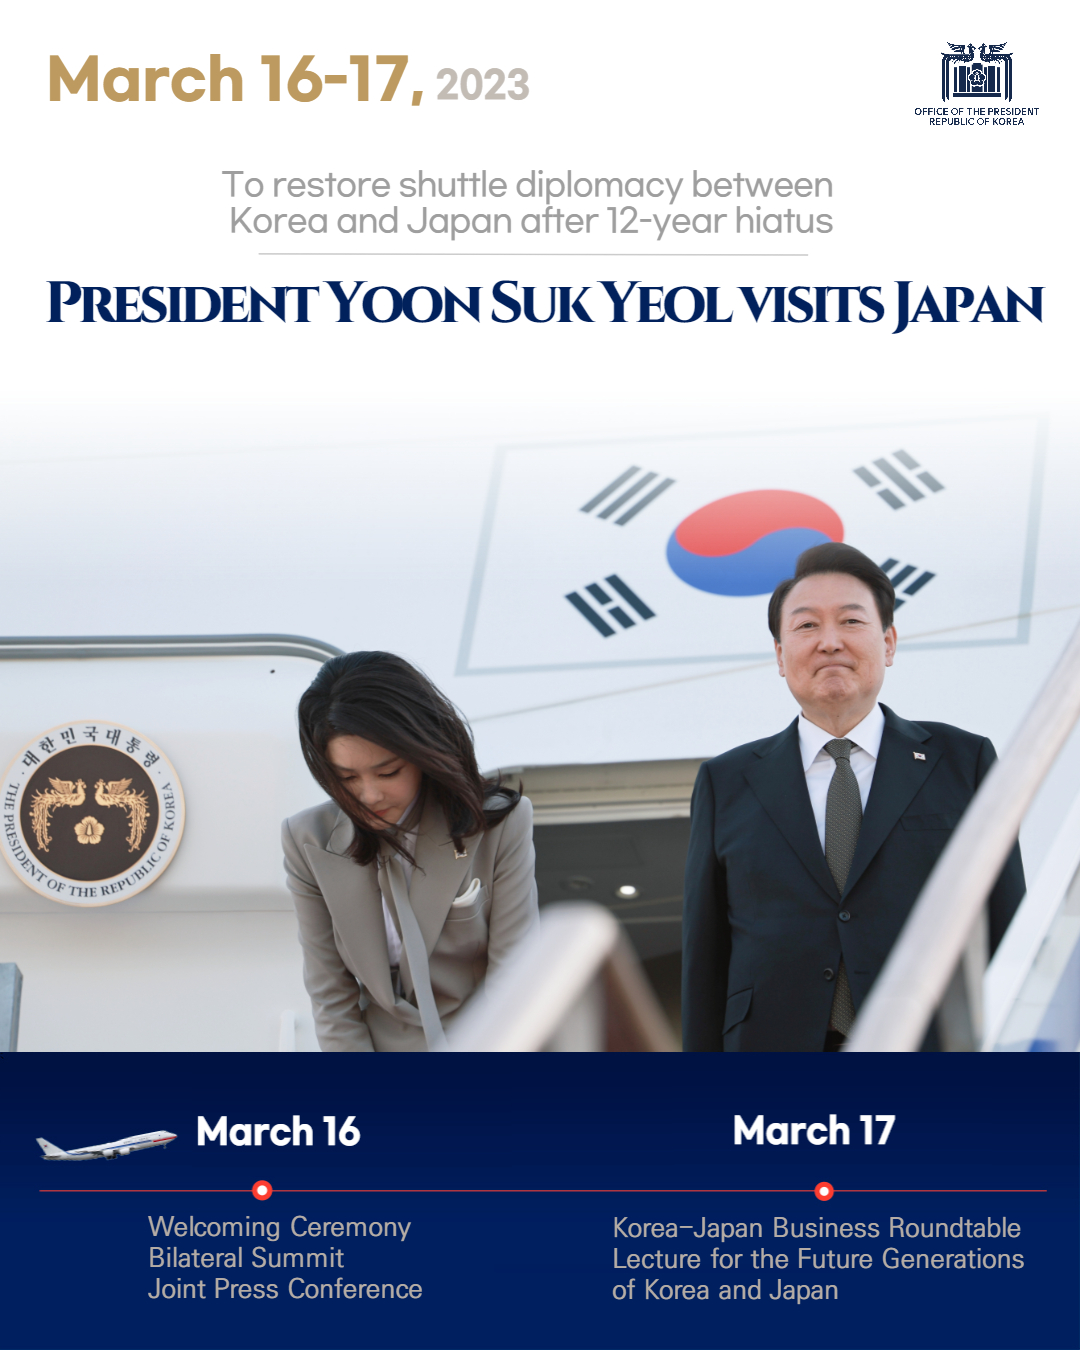 President Yoon Suk Yeol’s Visit to Restore Shuttle Diplomacy with Japan after 12-Year Hiatus Slide1